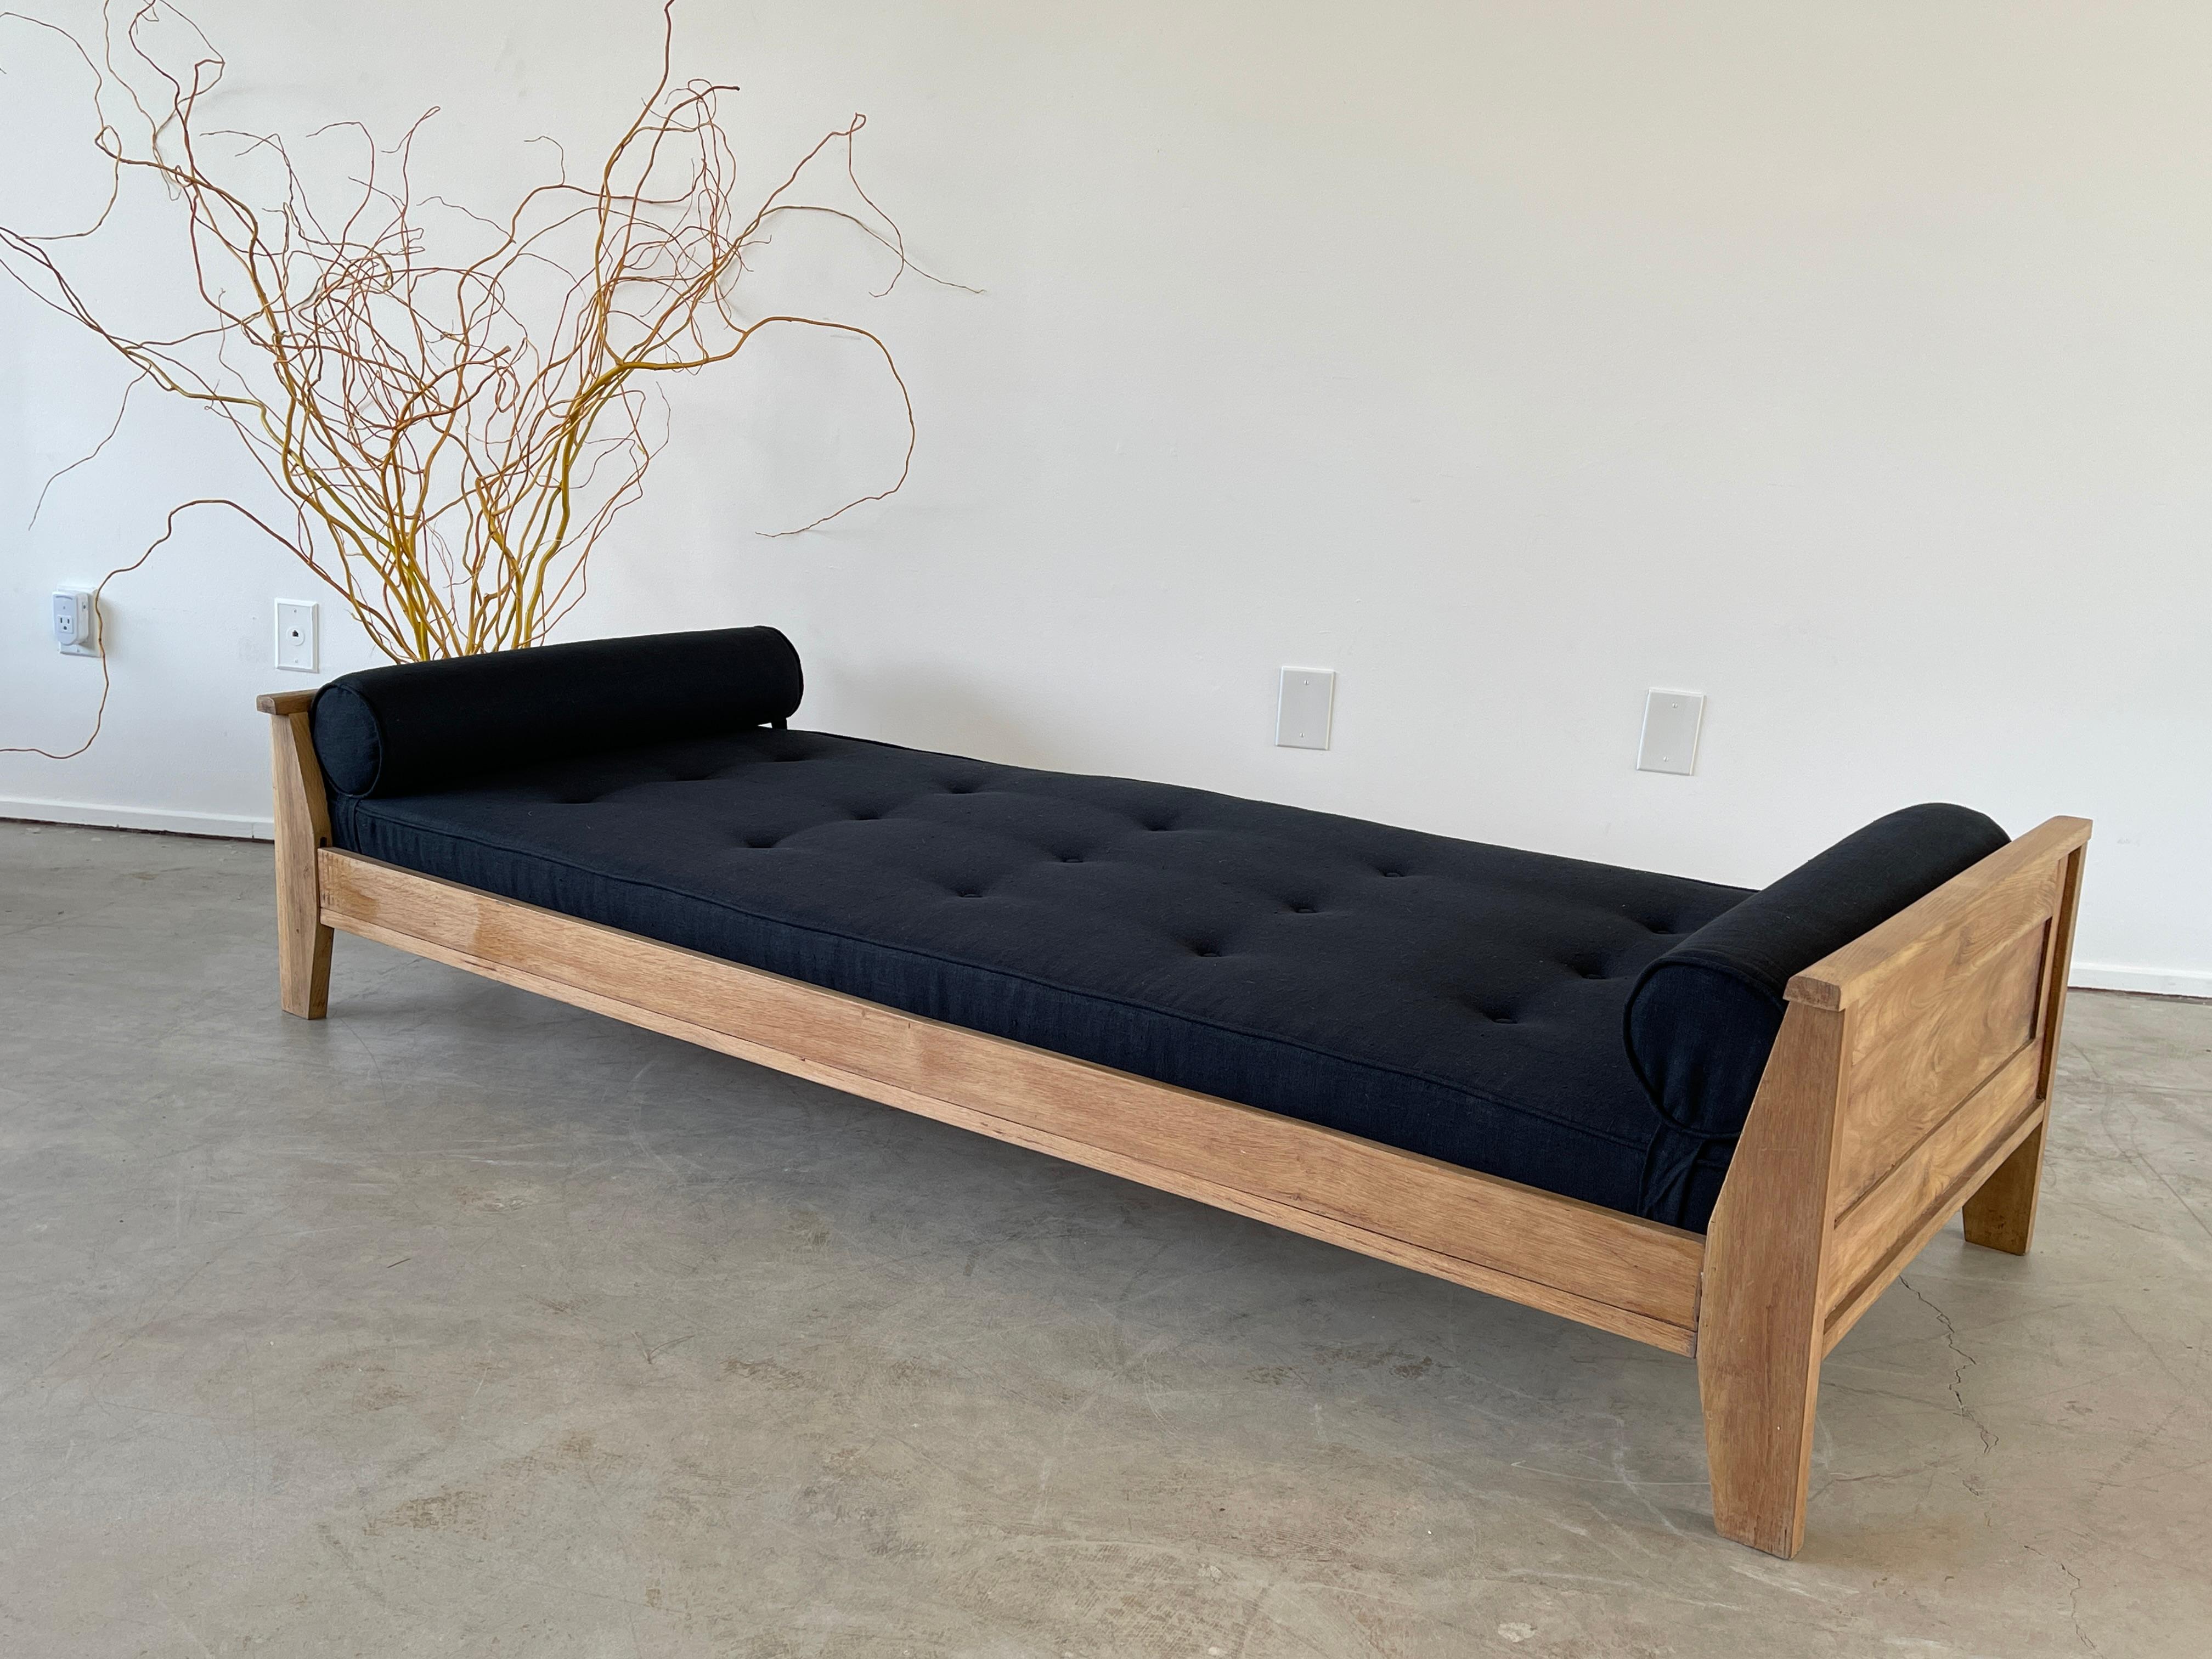 Wonderful oak daybed by Rene Gabriel with newly upholstered black linen cushion and bolsters at both ends. 
Great angular shape.